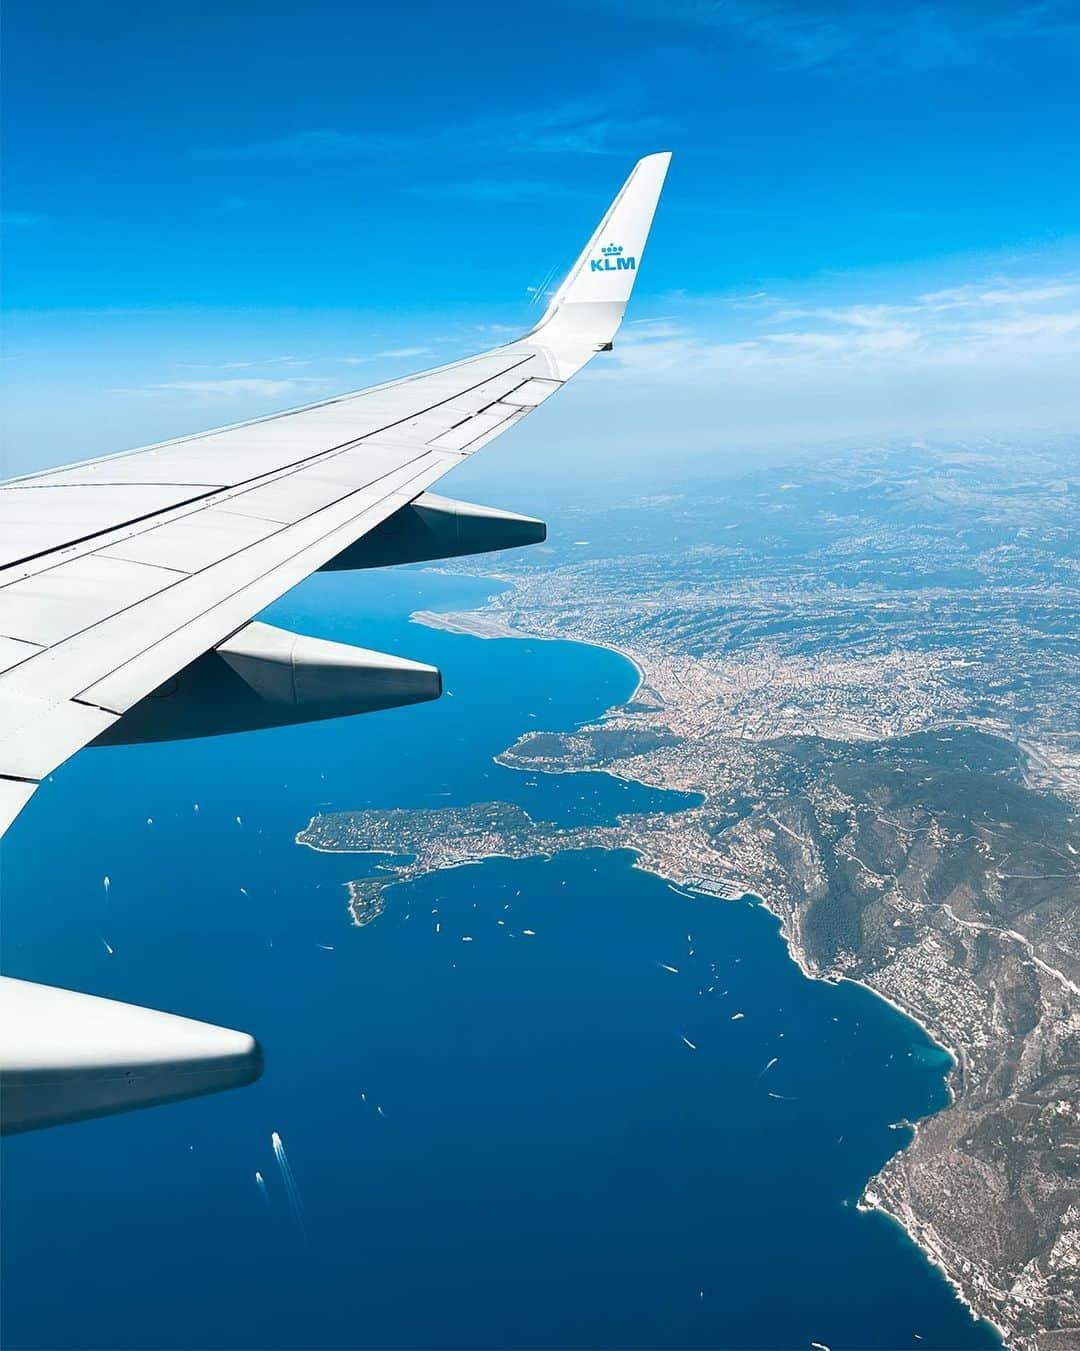 KLMオランダ航空のインスタグラム：「Flying to the capital of the French Riviera is always 'nice' 😉 📸 @malinverweij #KLM #royaldutchairlines #nice #cotedazur #frenchriviera #southoffrance」